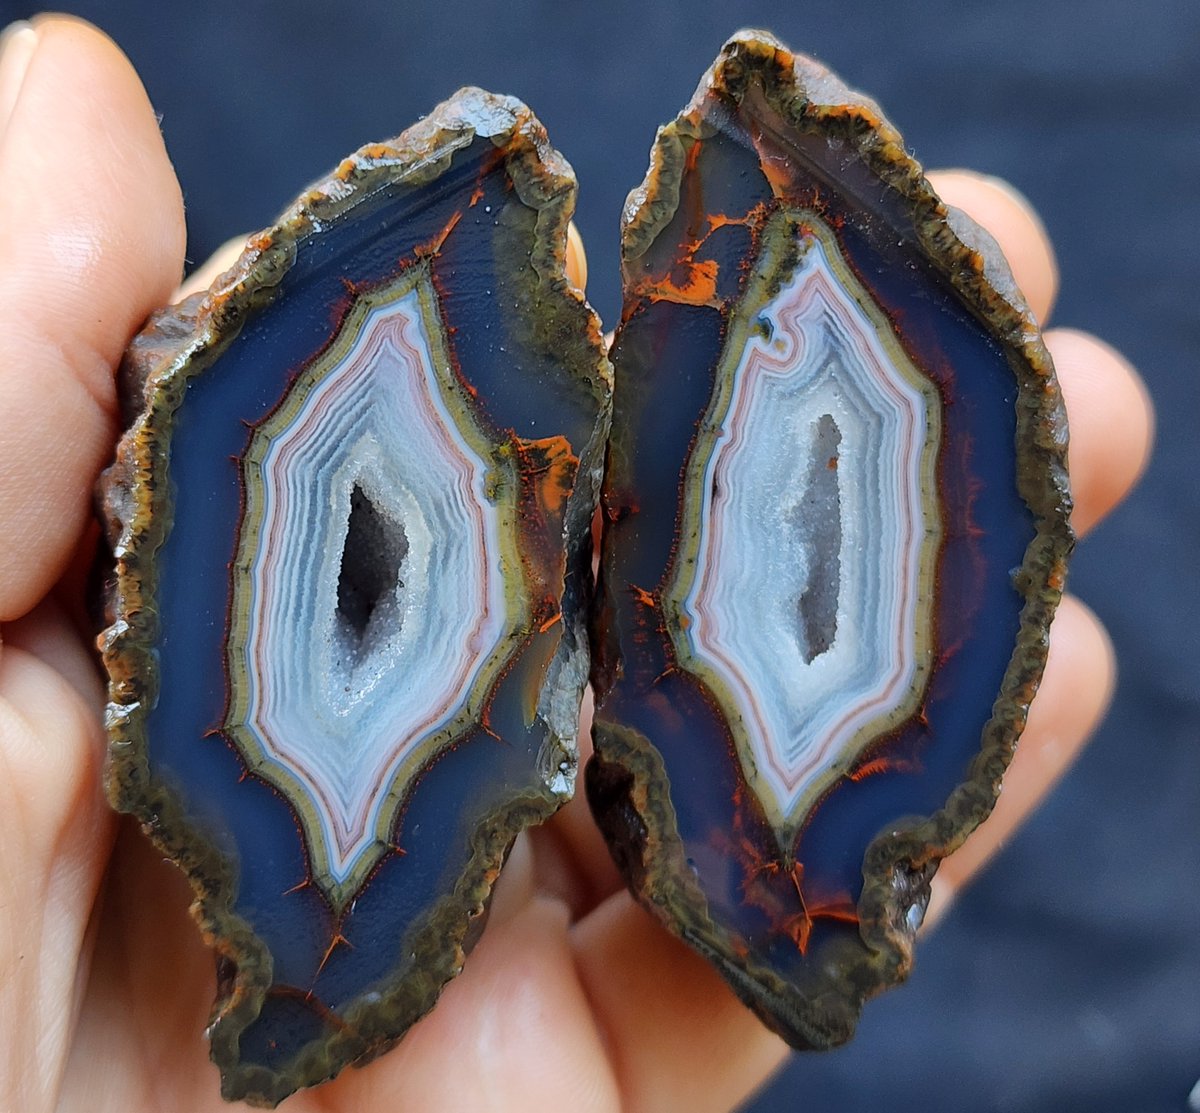 Banded  Druzy Geode
#agate #agata #achate #agatecollector #NFTs #PhotographyIsArt #photographer #nature #naturelovers #natural #Collectibles #crystals #geode #GeologistsDay #geology #geologyrocks #blueagate